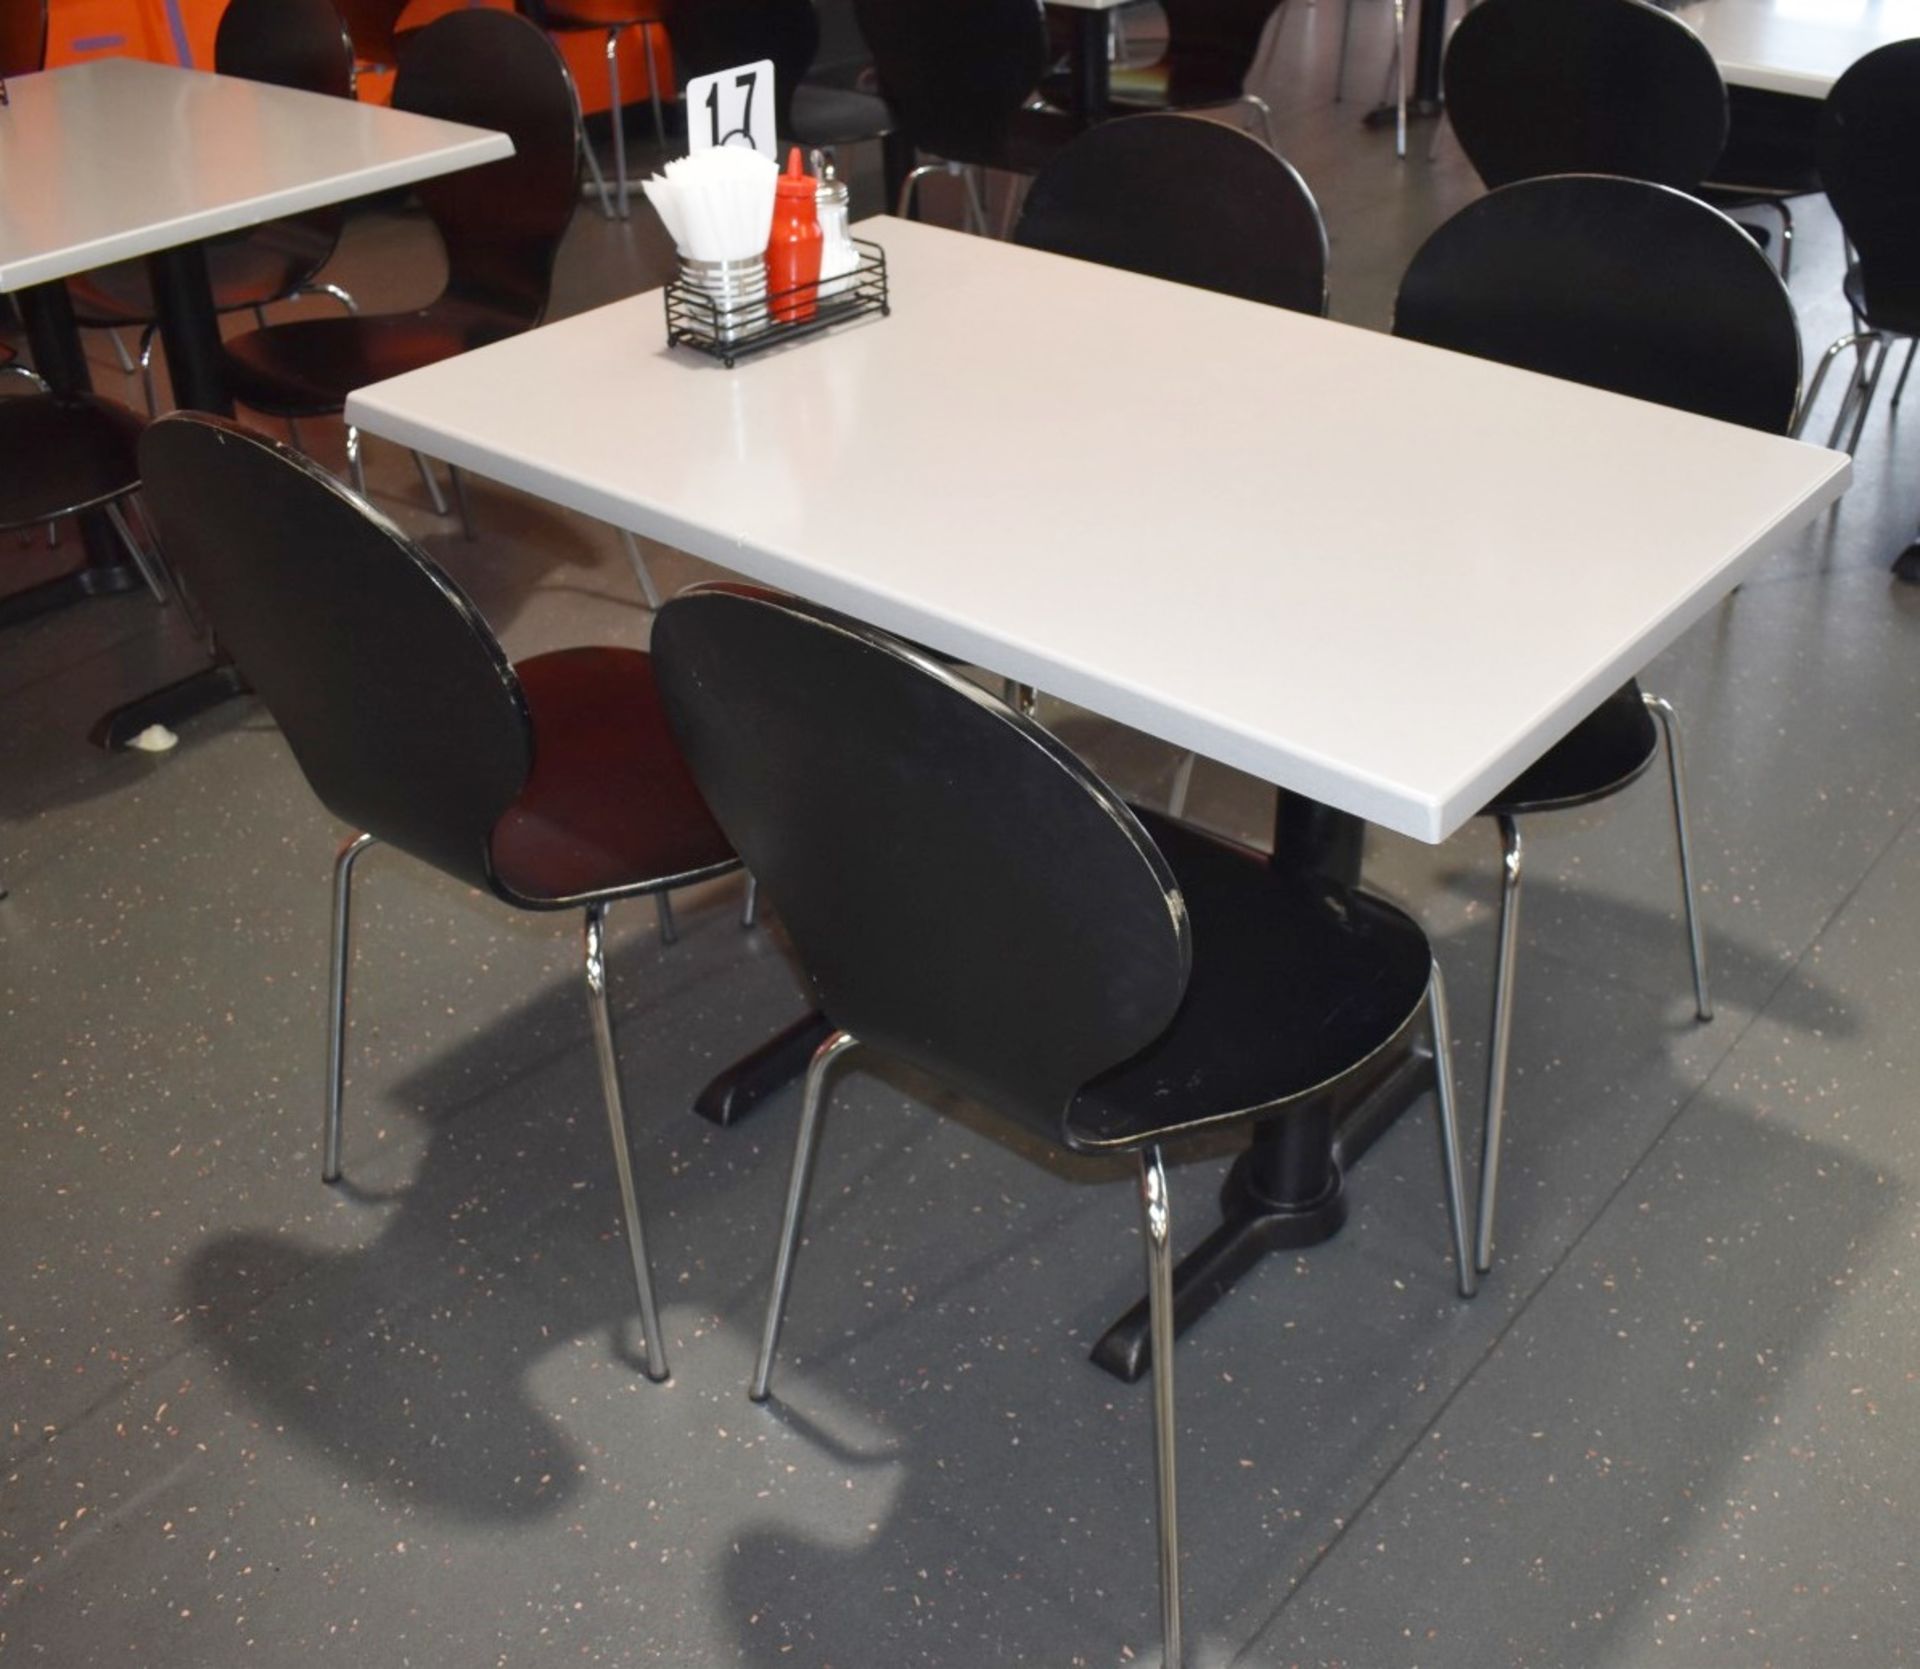 8 x Table and Chair Sets Suitable For Canteens, Cafes or Bistros - Includes 8 Tables and 24 Chairs - Image 4 of 15